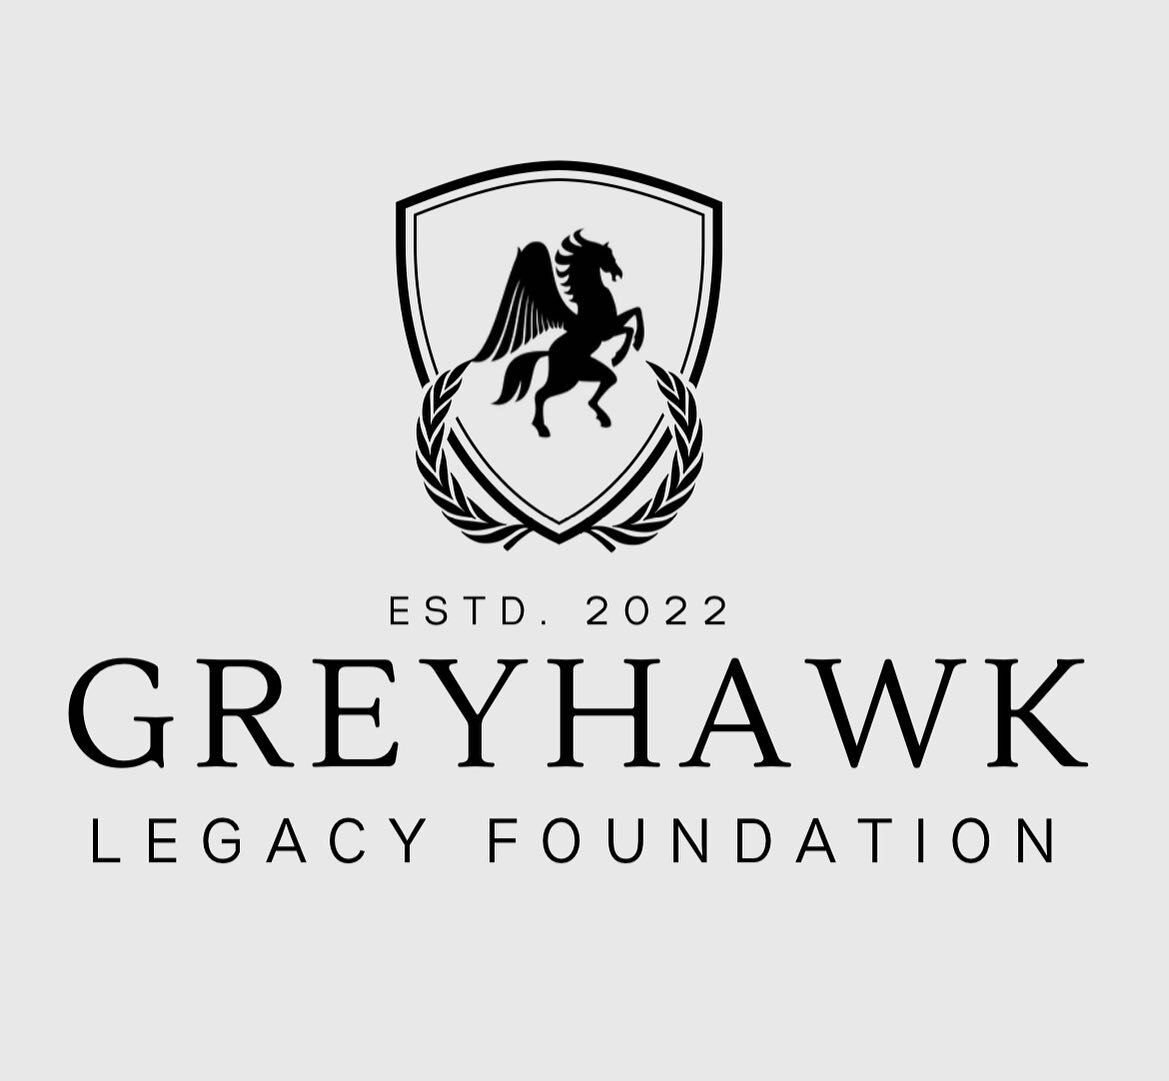 The Greyhawk Legacy Foundation celebrates military spouses on this Military Spouse Appreciation Day.  Military spouses are often the fabric that keeps our military families together while our service members defend freedom.  The Greyhawk Legacy Found